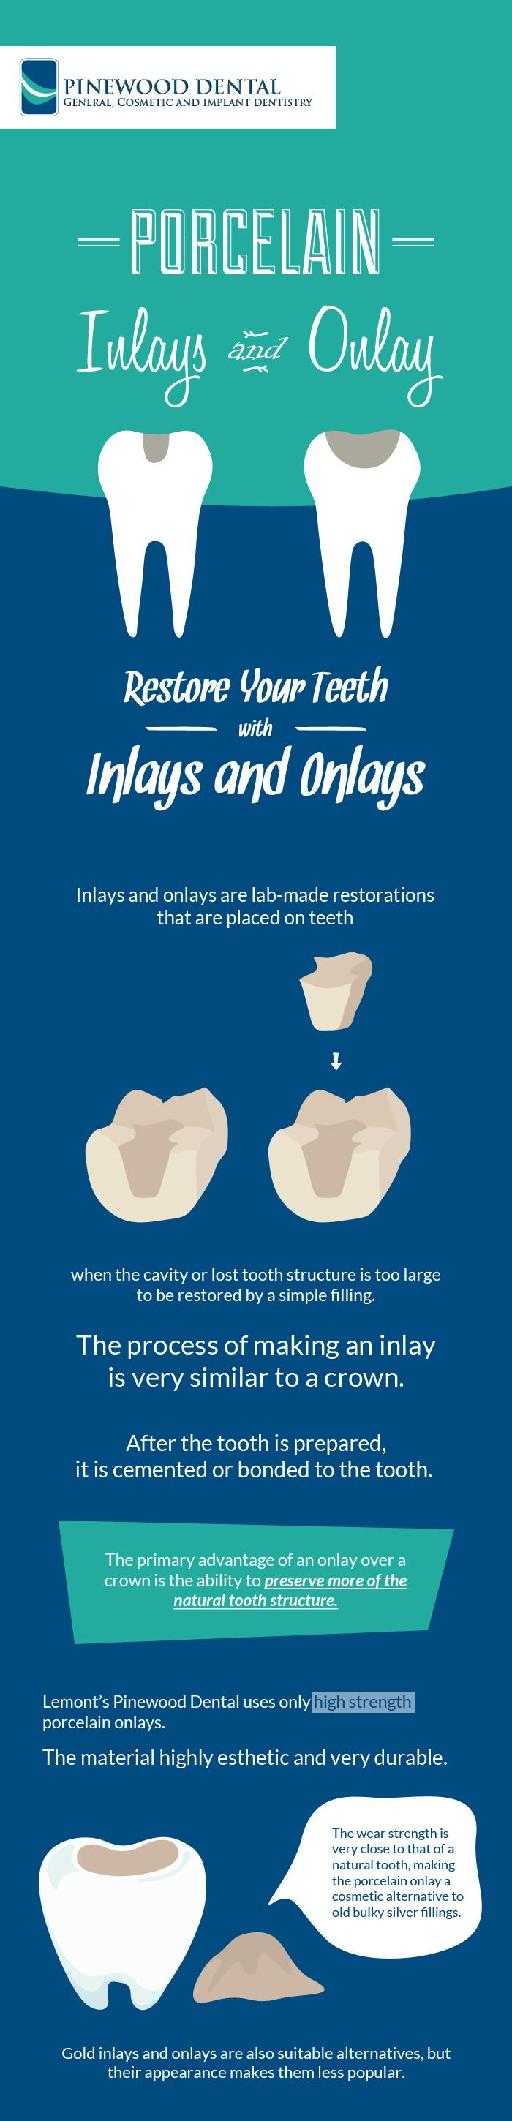 Restore Your Teeth with Inlays and Onlays by Pinewood Dental